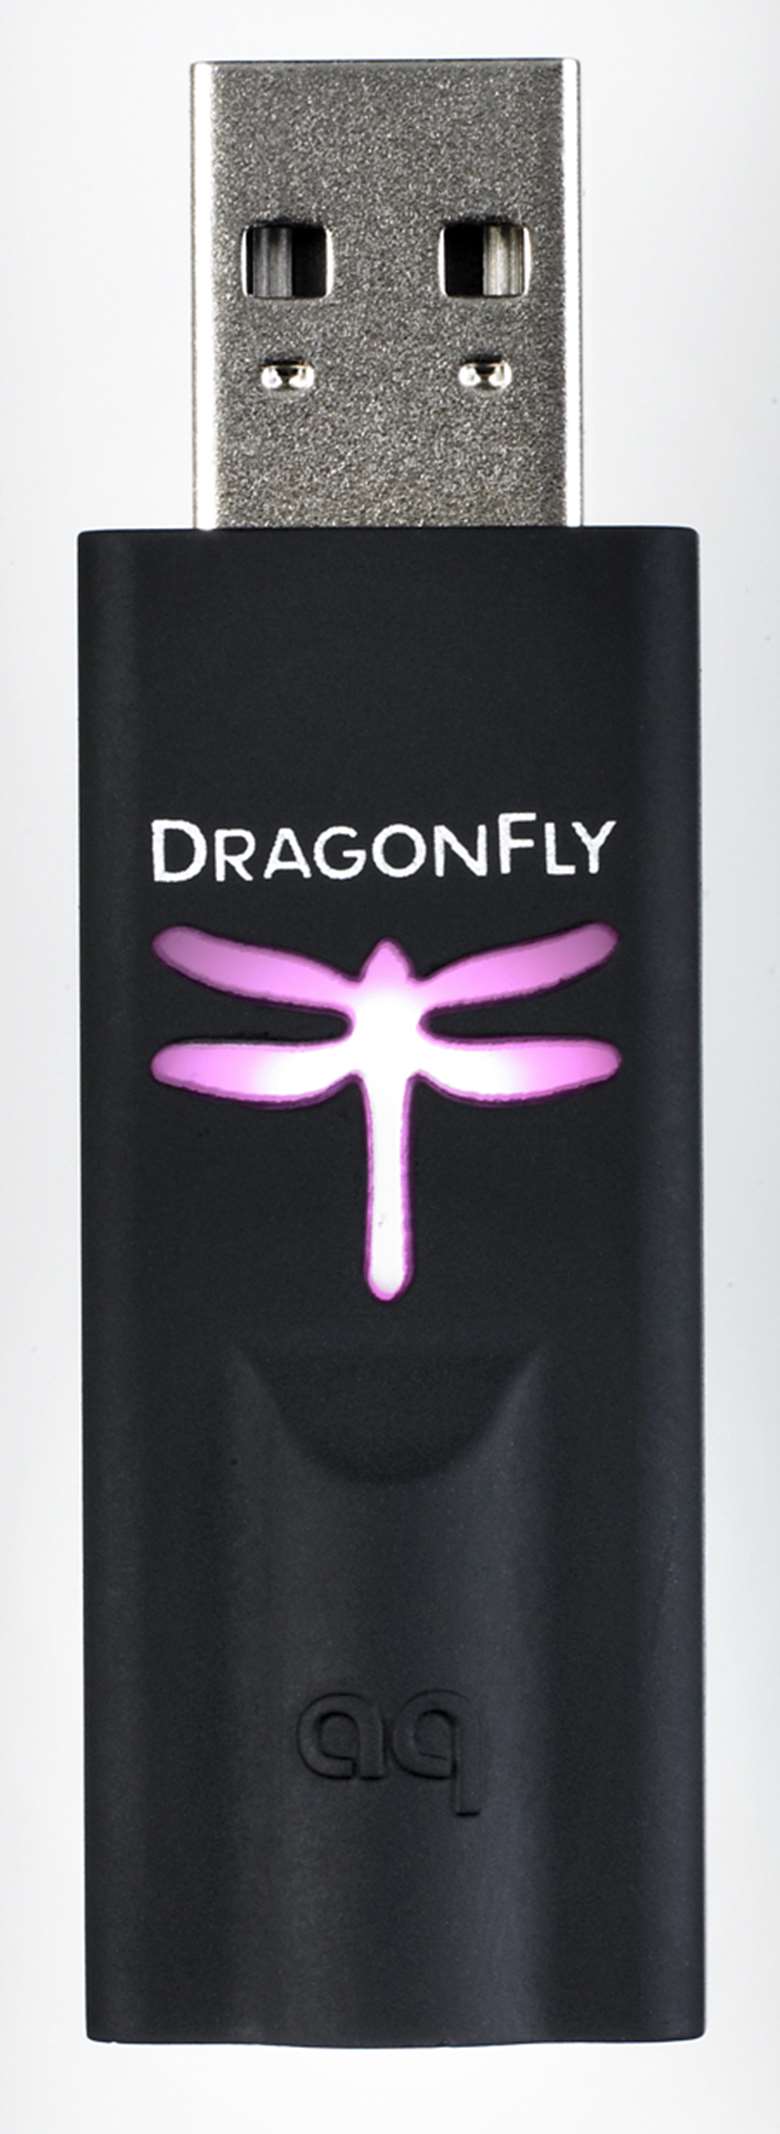 DragonFly's logo changes colour according to the signal being received